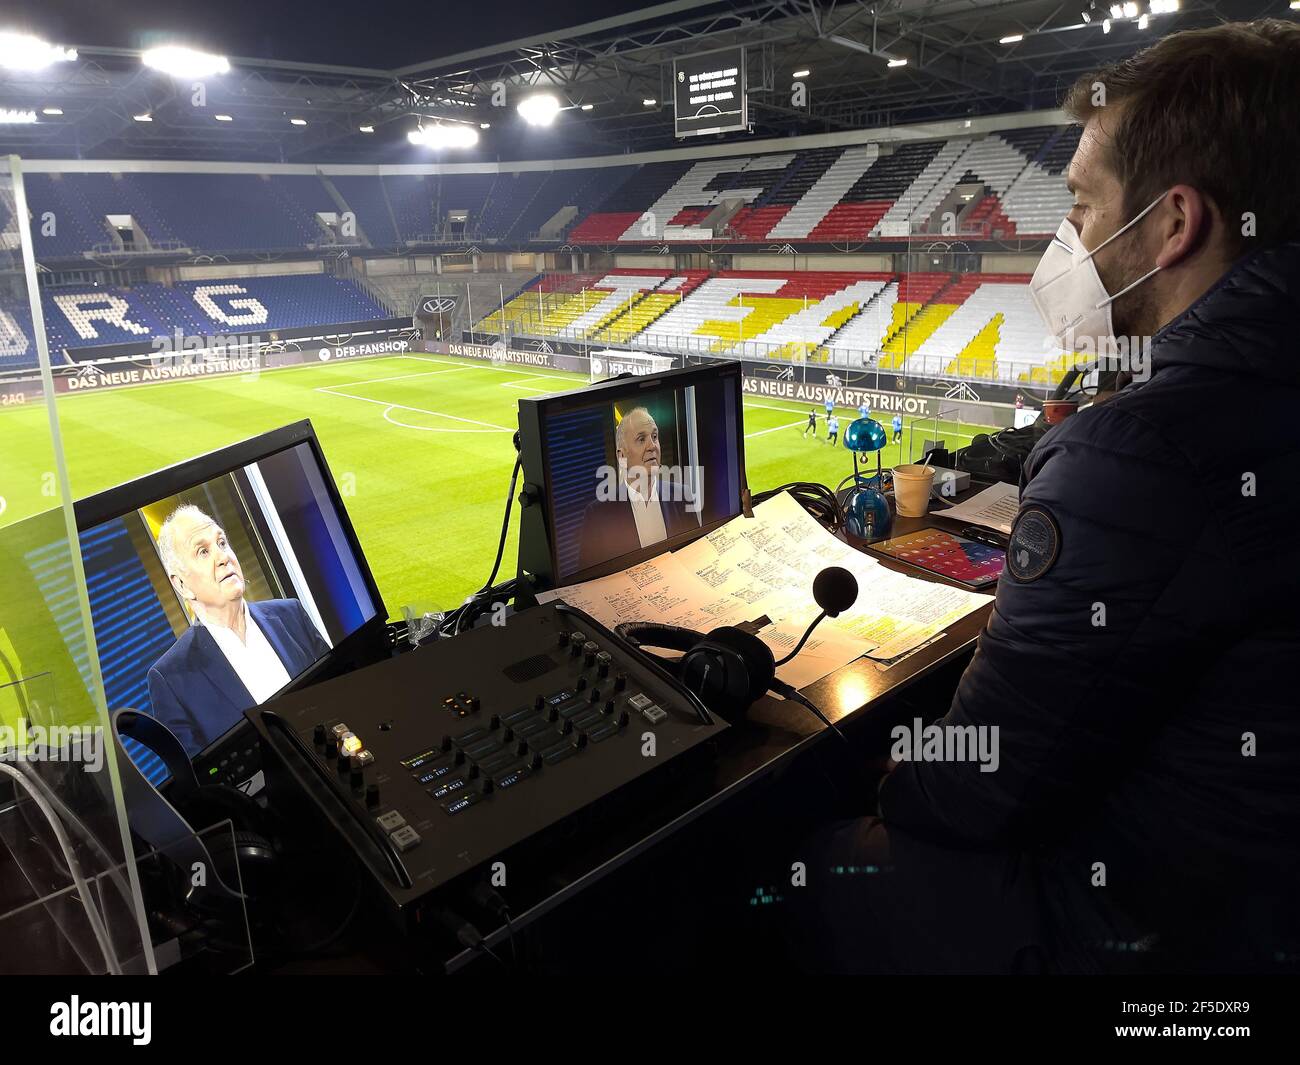 Uli HOENESS (former FCB President ),  als TV Experte bei RTL im Studio in the match GERMANY - ICELAND  Deutschland - ISLAND Qualification for World Championships, WM Quali, Season 2020/2021,  March 25, 2021  in Duisburg, Germany.  © Peter Schatz / Alamy Live News  Important: DFB regulations prohibit any use of photographs as image sequences and/or quasi-video. Stock Photo